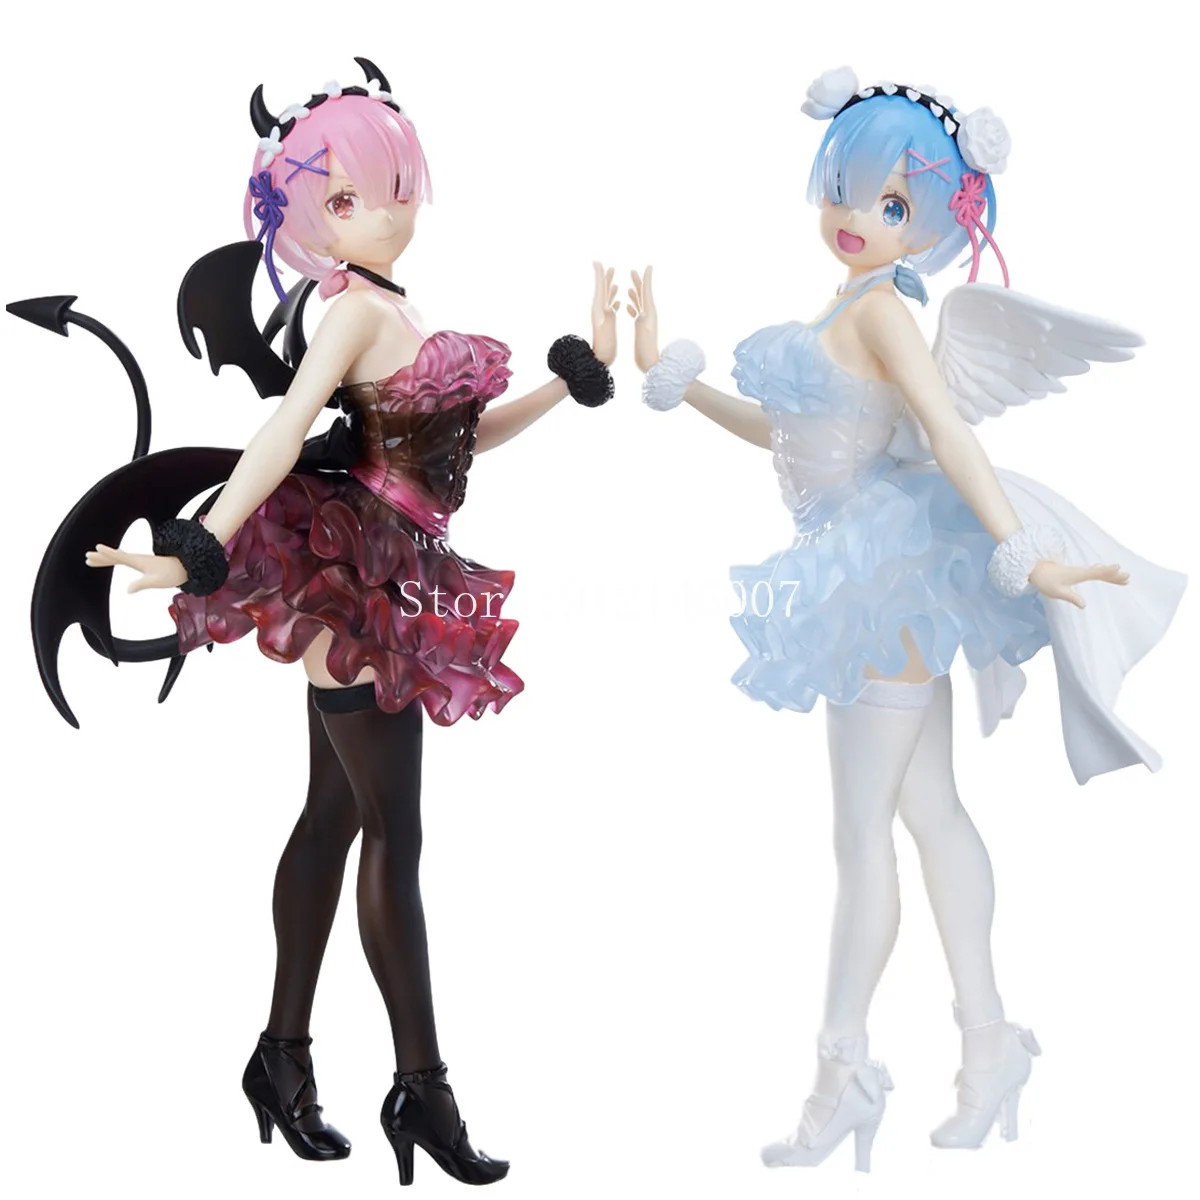 16cm Re:ZERO -Starting Life in Another World Anime Figure Angels Rem Demons Ram Action Figure Rem/Ram Figurine Model Doll Toys